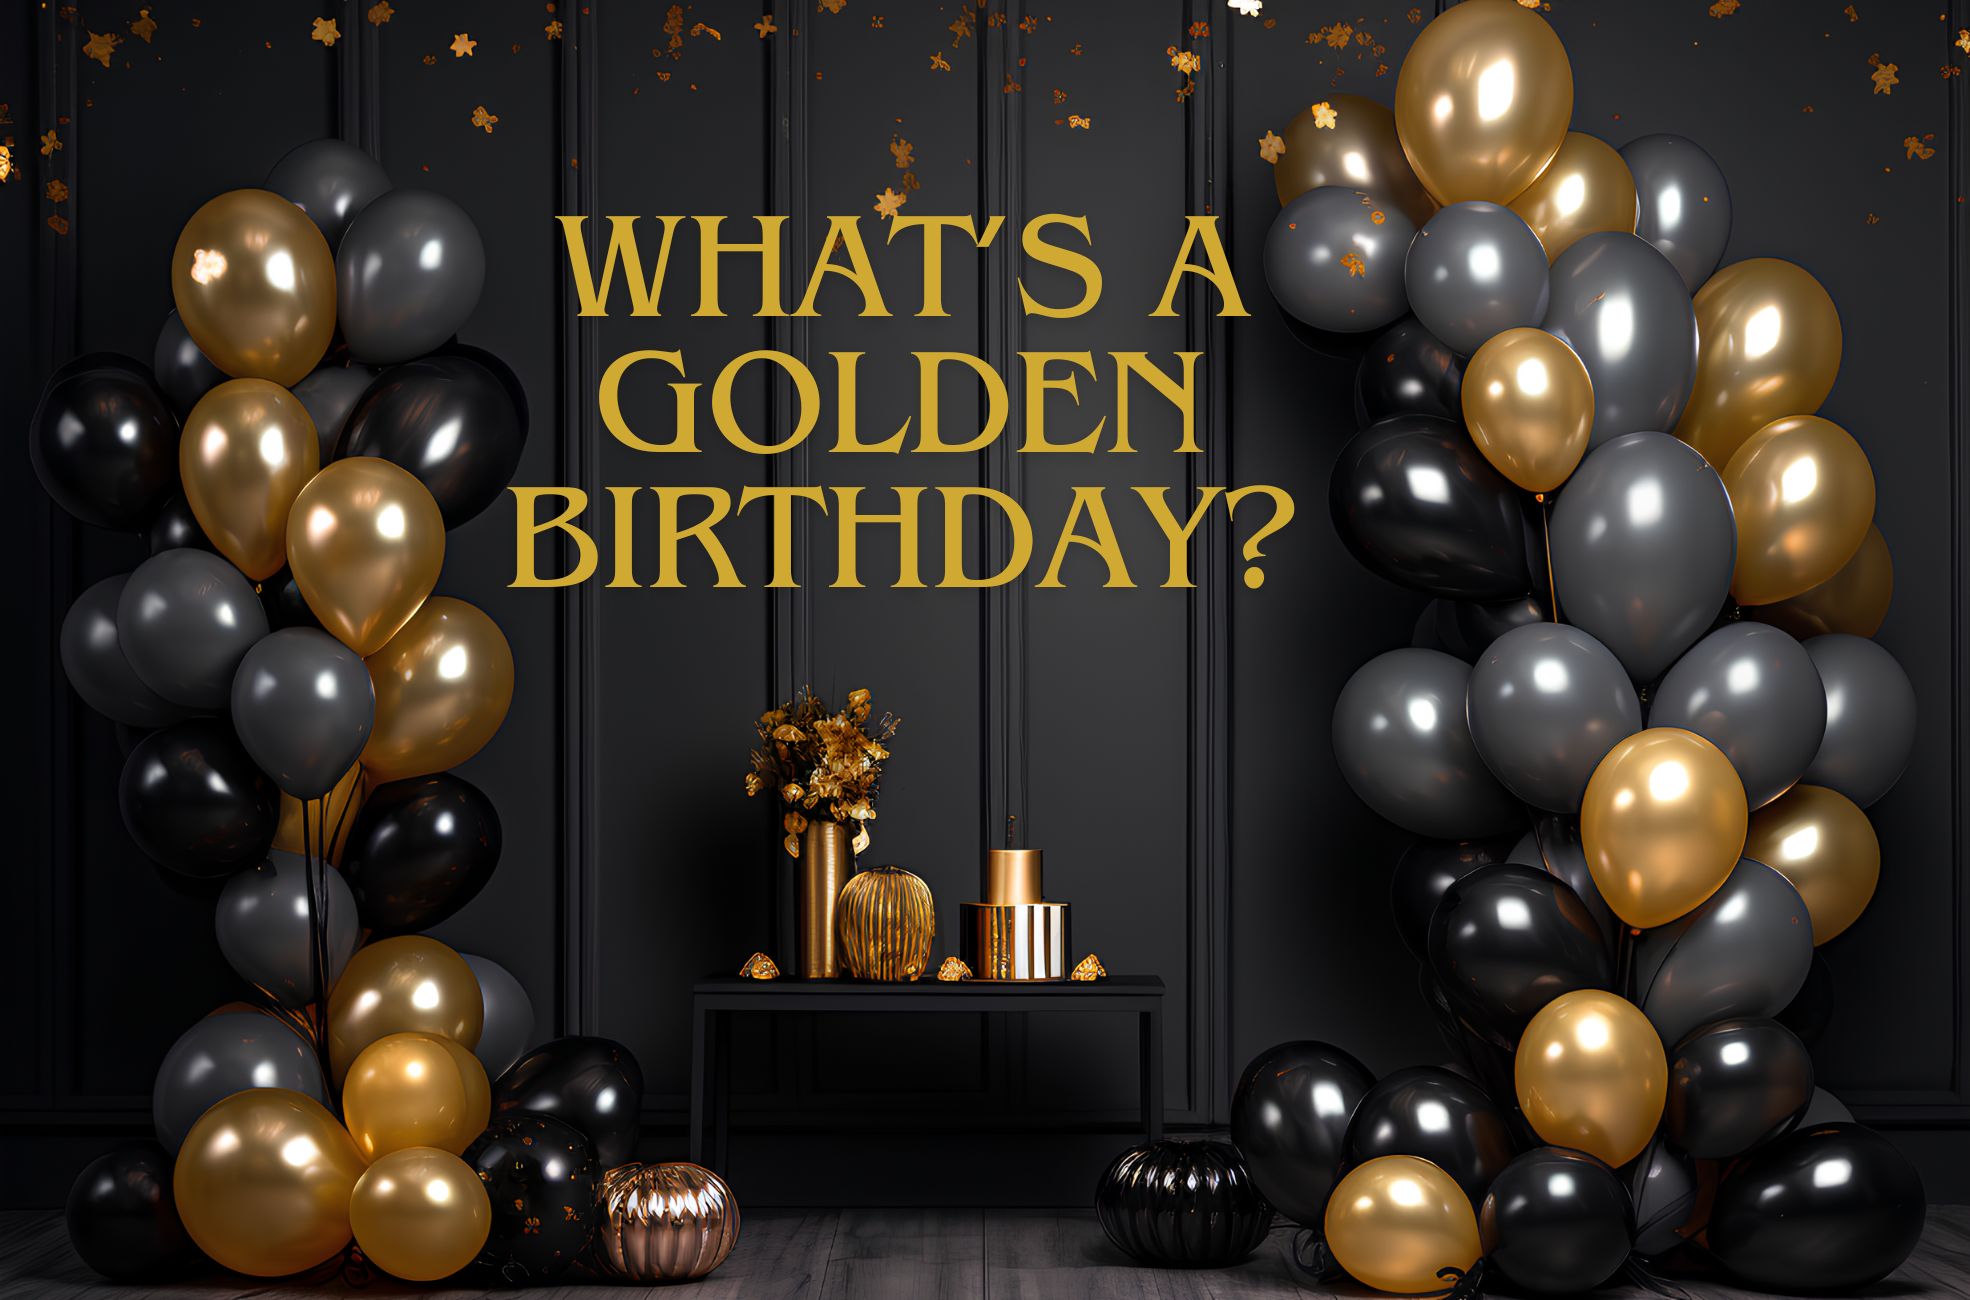 Decorations And Title Saying "What's A Golden Birthday?"